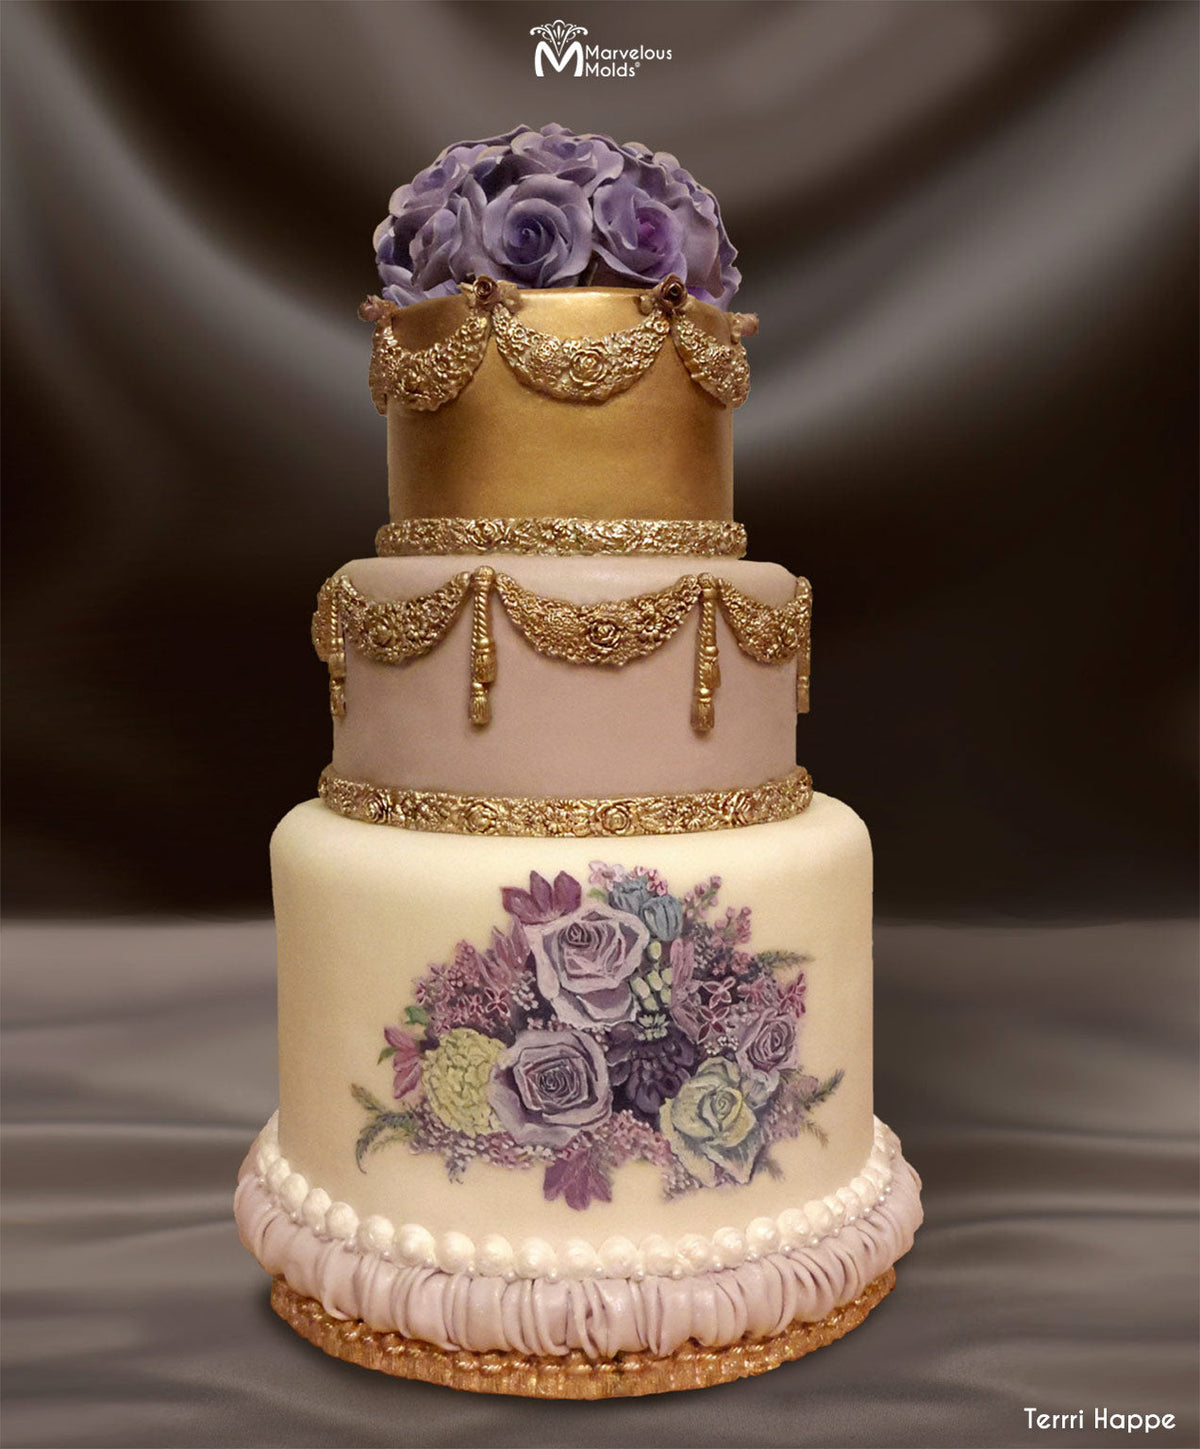 Vintage Style Wedding Cake Decorated Using the Marvelous Molds Grand Tassel Drop Silicone Mold for Cake Decorating